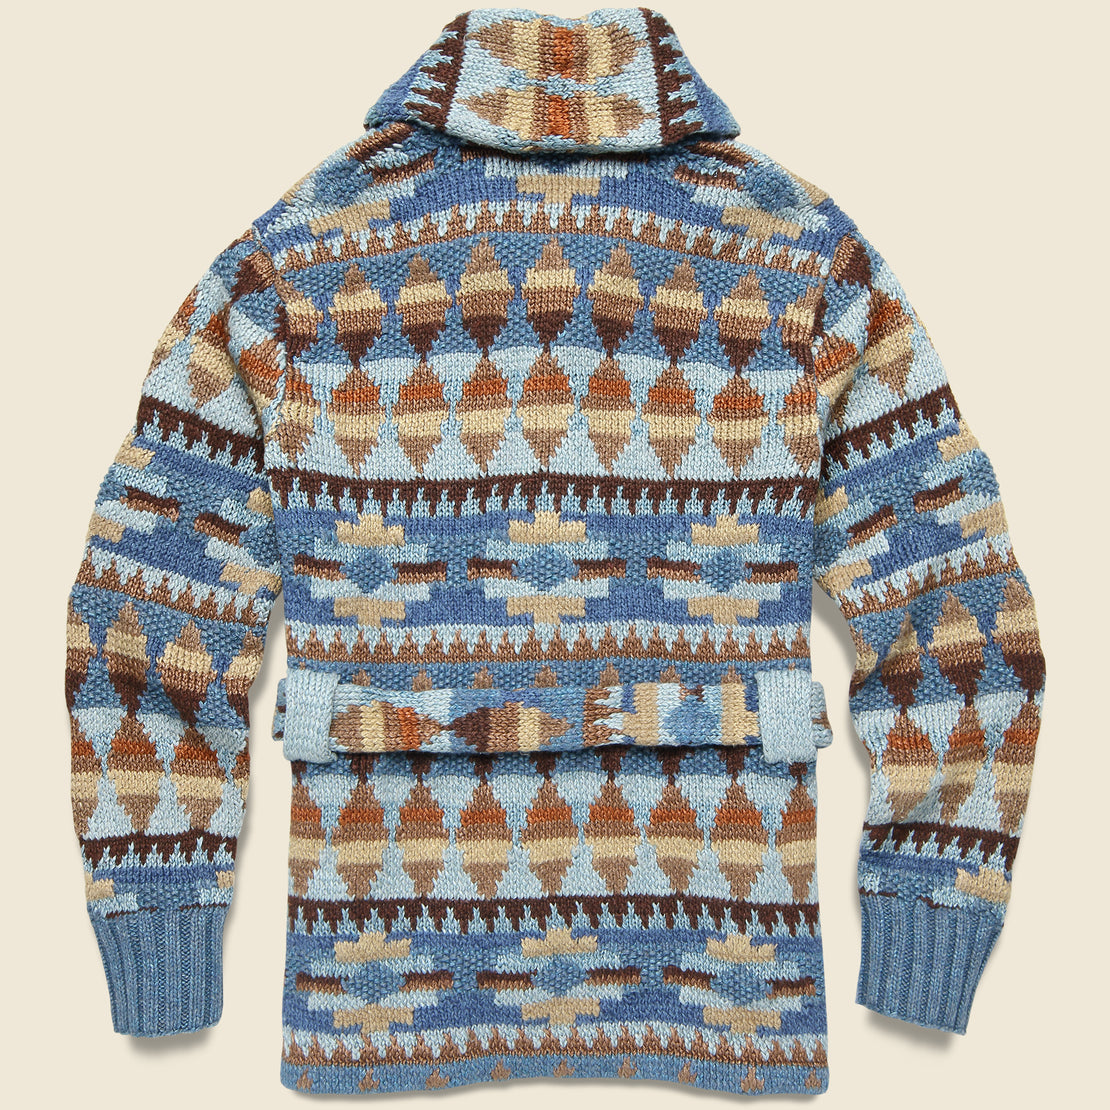 Ranch Shawl Cardigan - Blue Multi - RRL - STAG Provisions - Tops - Sweater